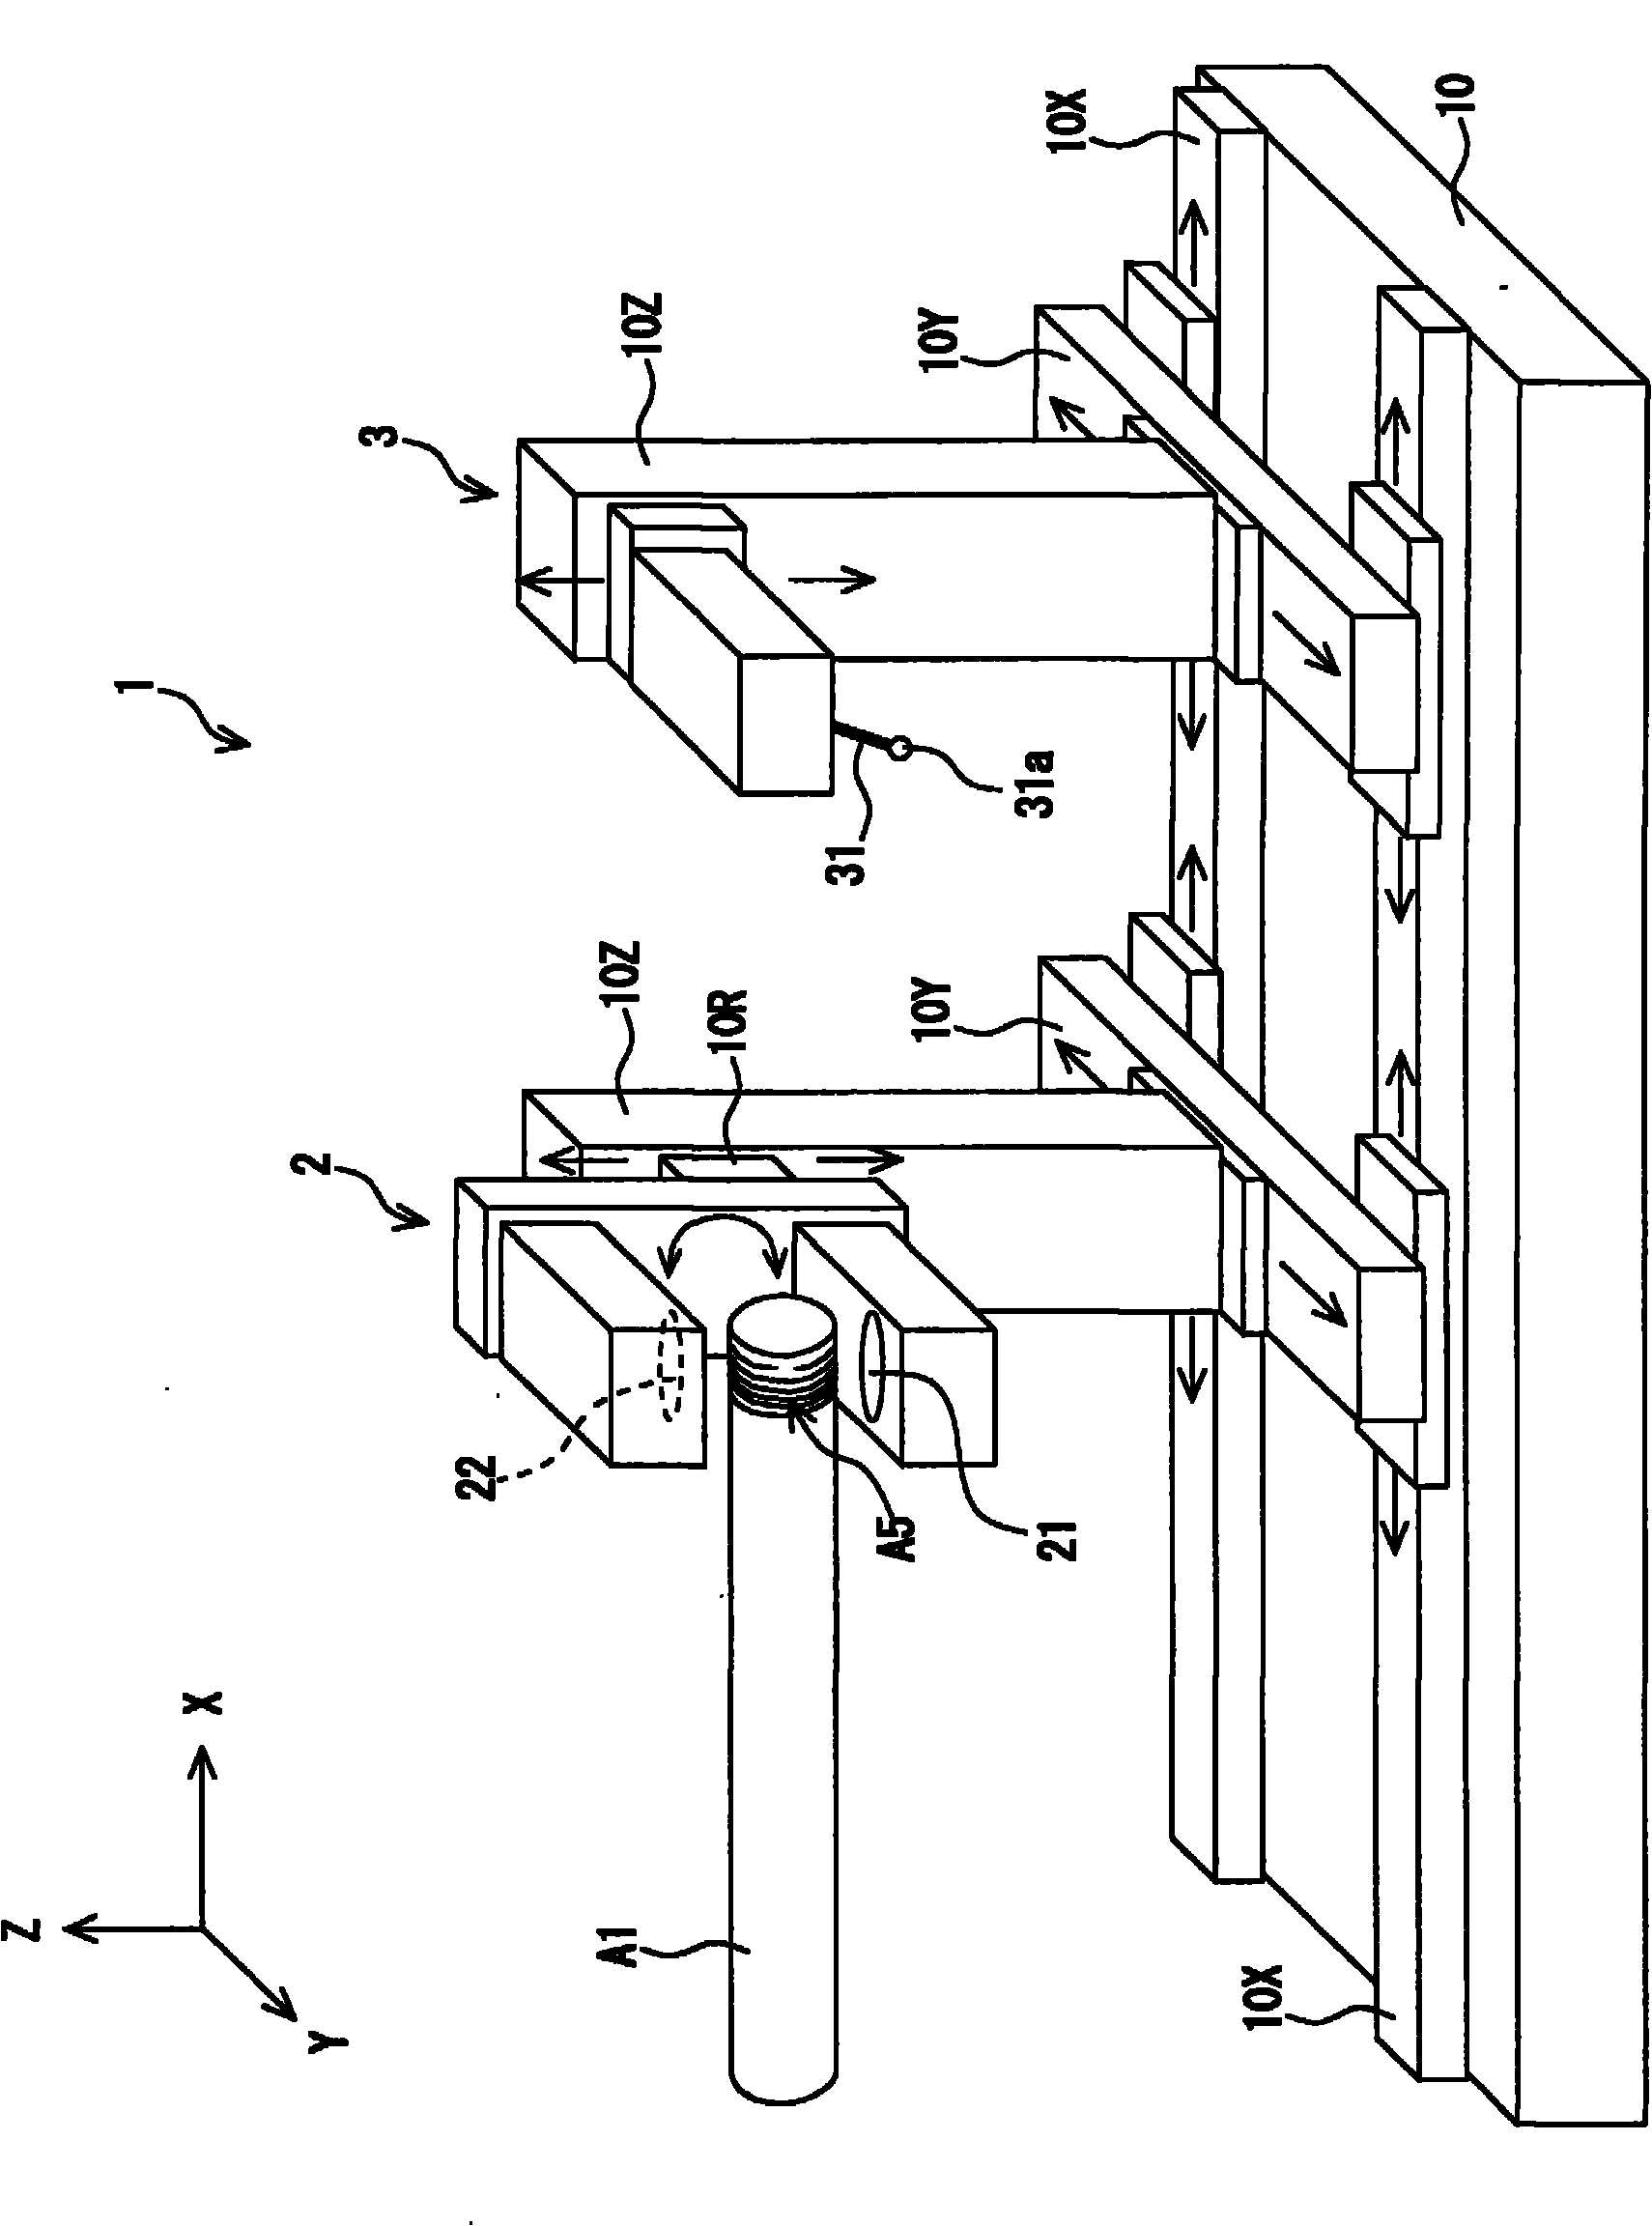 Device for measuring screw element at pipe end, system for measuring screw element and method for measuring screw element